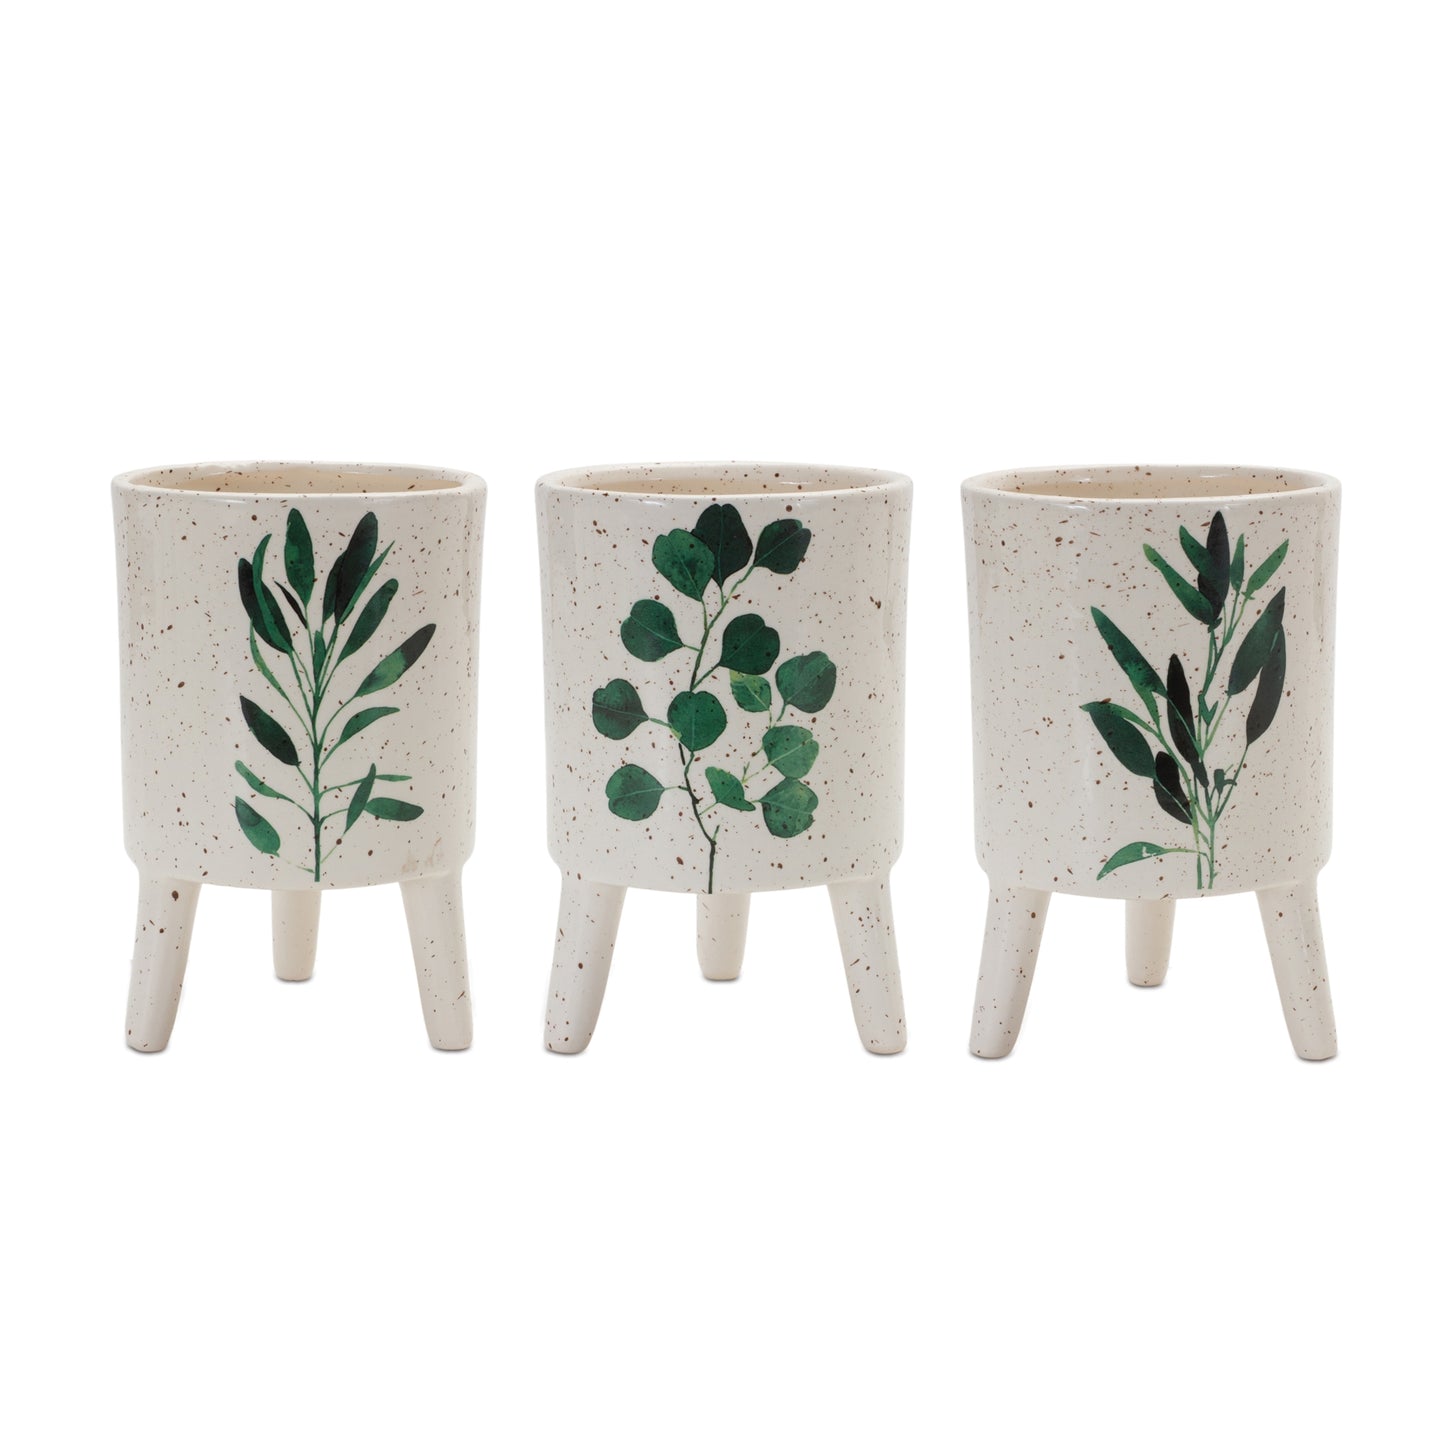 Footed Foliage Print Planter (Set of 3)